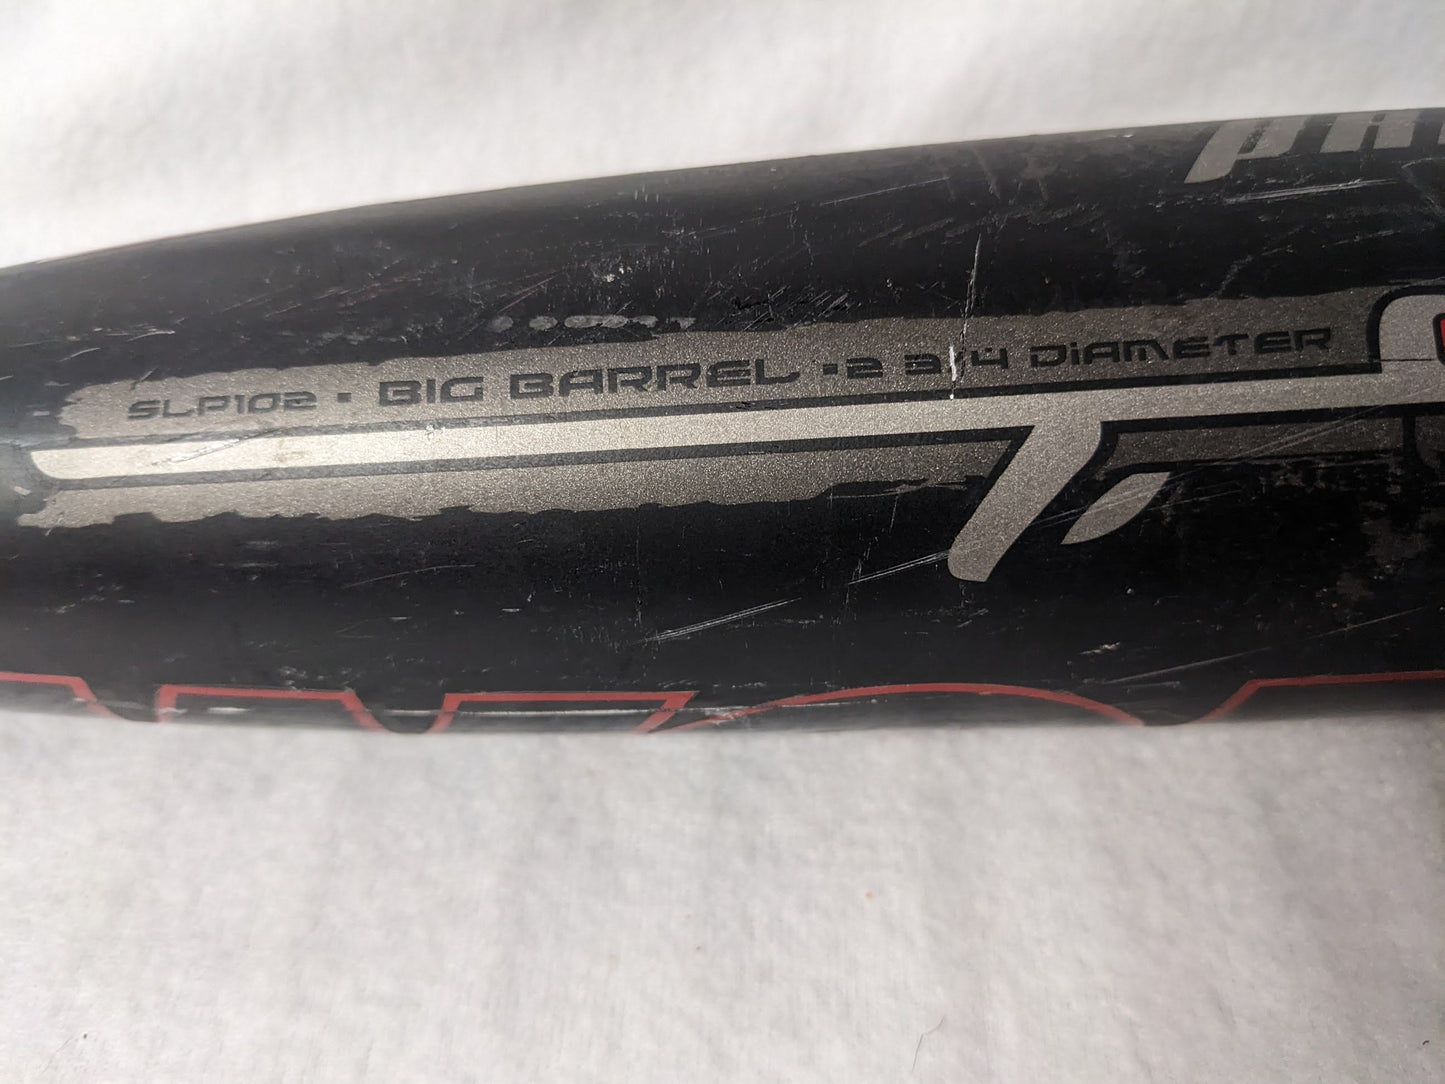 Worth Llithium Prodigy Baseball Size Bat Size 31 In 21 oz Color Gray Condition Used USSSA